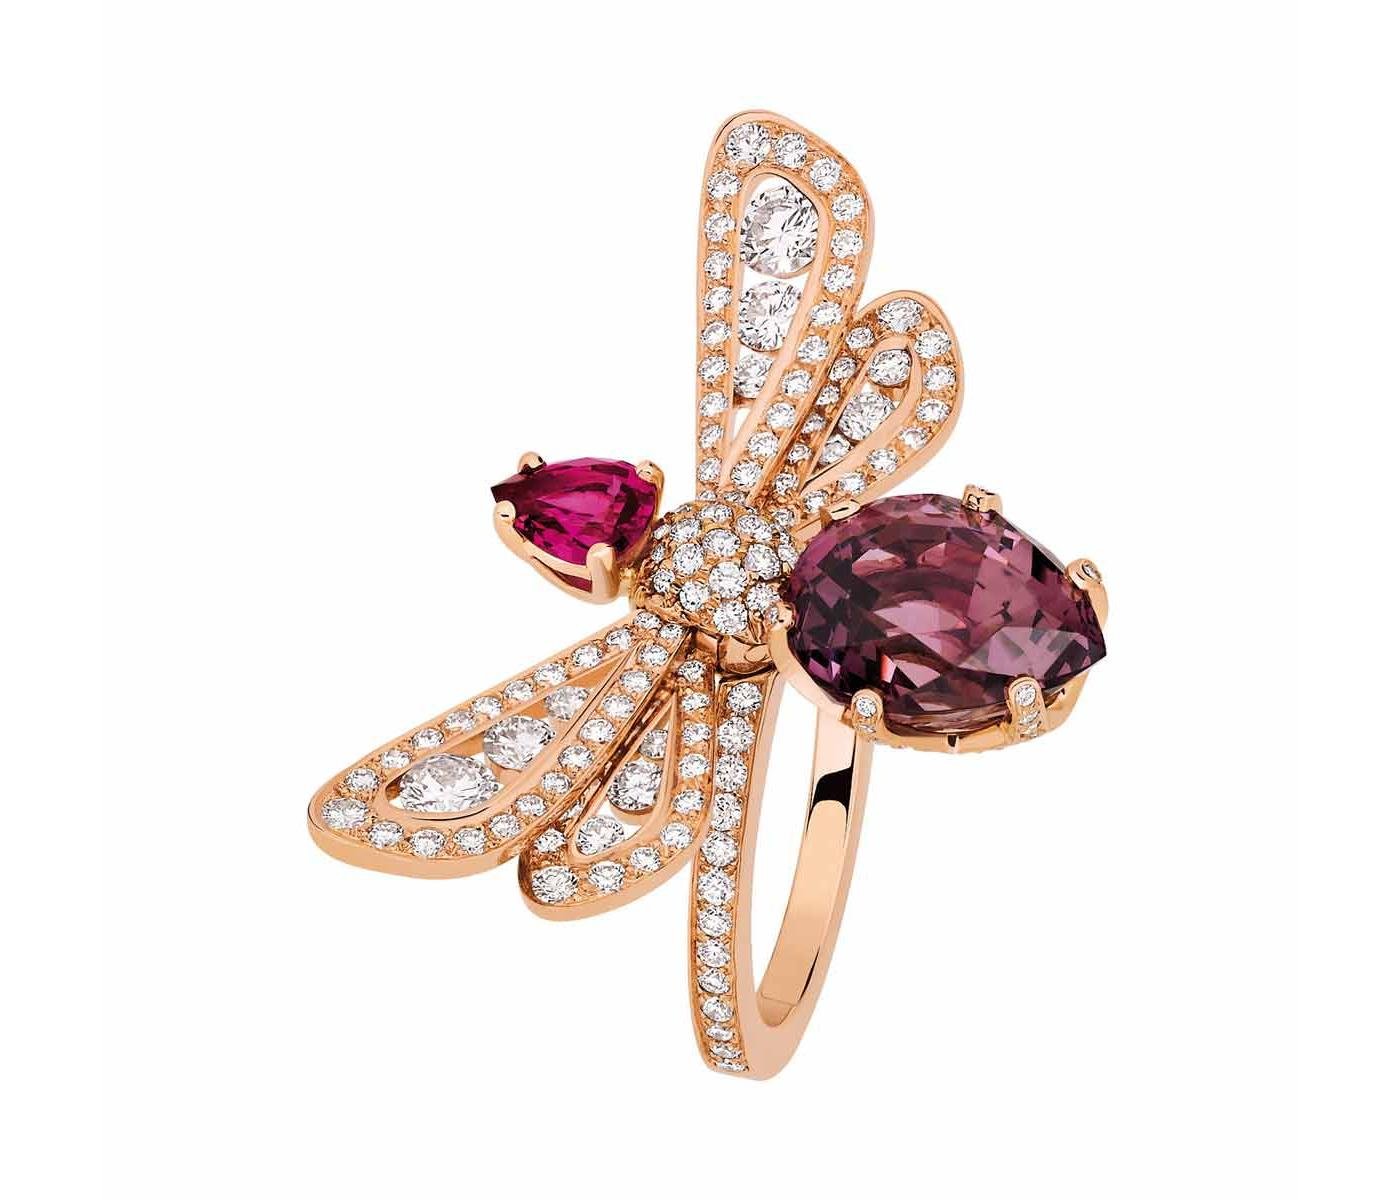 Ring by Chaumet